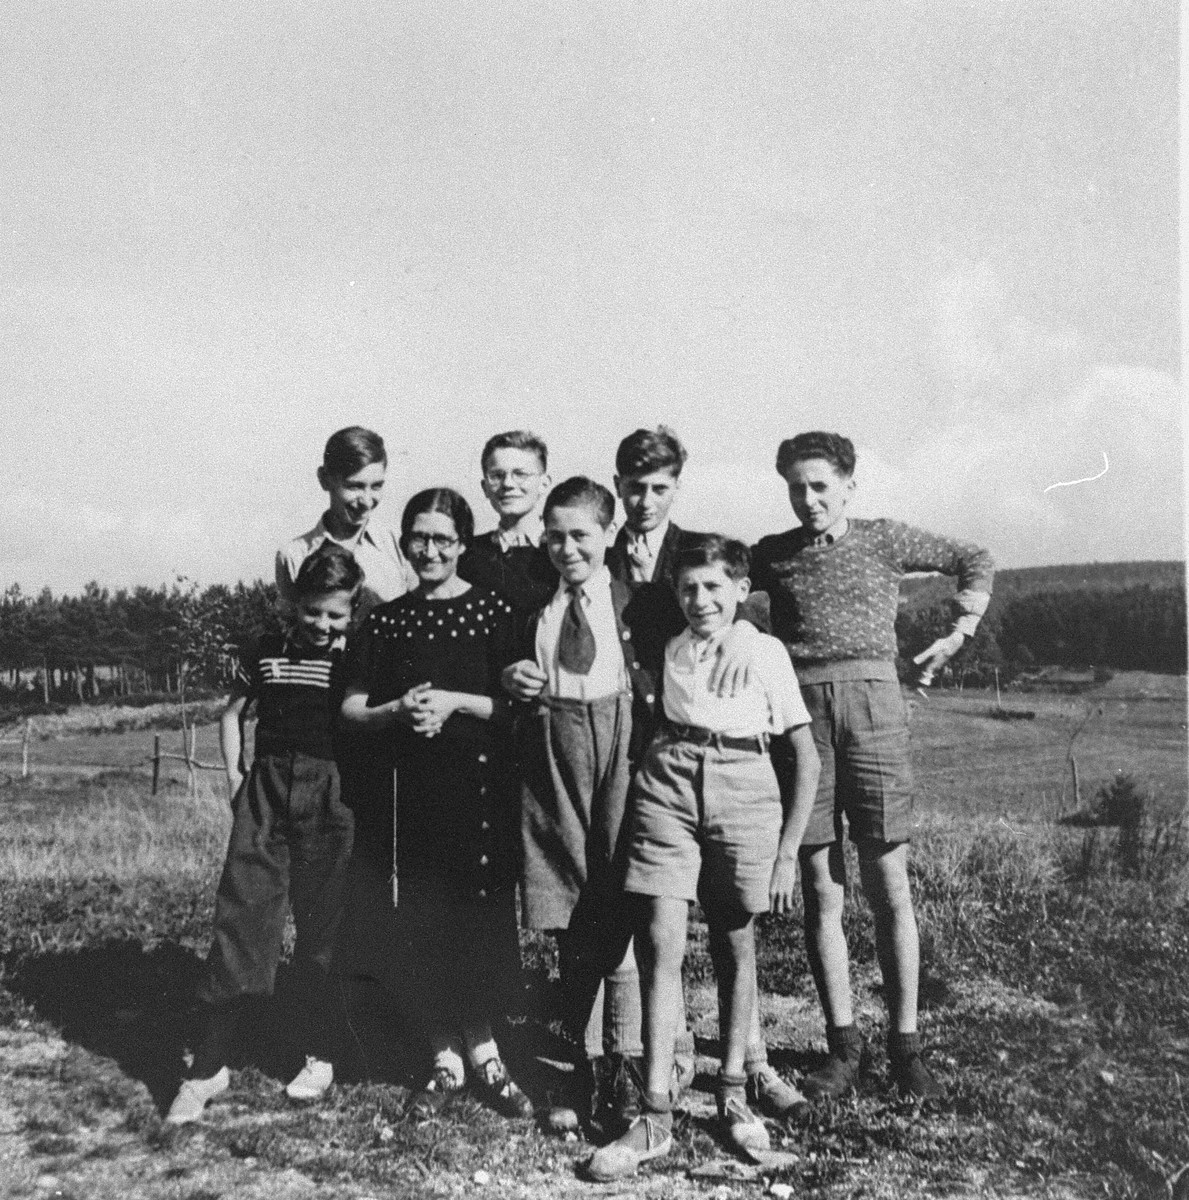 Juliette Usach poses with a group of Jewish youth who are living at the La Guespy children's home in Le Chambon-sur Lignon.

This is one photo from an album presented to Elizabeth Kaufmann prior to her departure from the La Guespy refugee home in Le Chambon-sur-Lignon.  

Founded in 1941 by the Secours Suisse aux enfants and run by Juliette Usach, the La Guespy children's home provided shelter to a number of Jewish and non-Jewish refugee children who were living in Le Chambon-sur-Lignon during the Nazi occupation.

Among those pictured are Jean Nallet (back row with glasses), Joseph Atlas (back row, third from the left), Victor Atlas (back row, right), Manfred Goldberger and Juliette Usach.